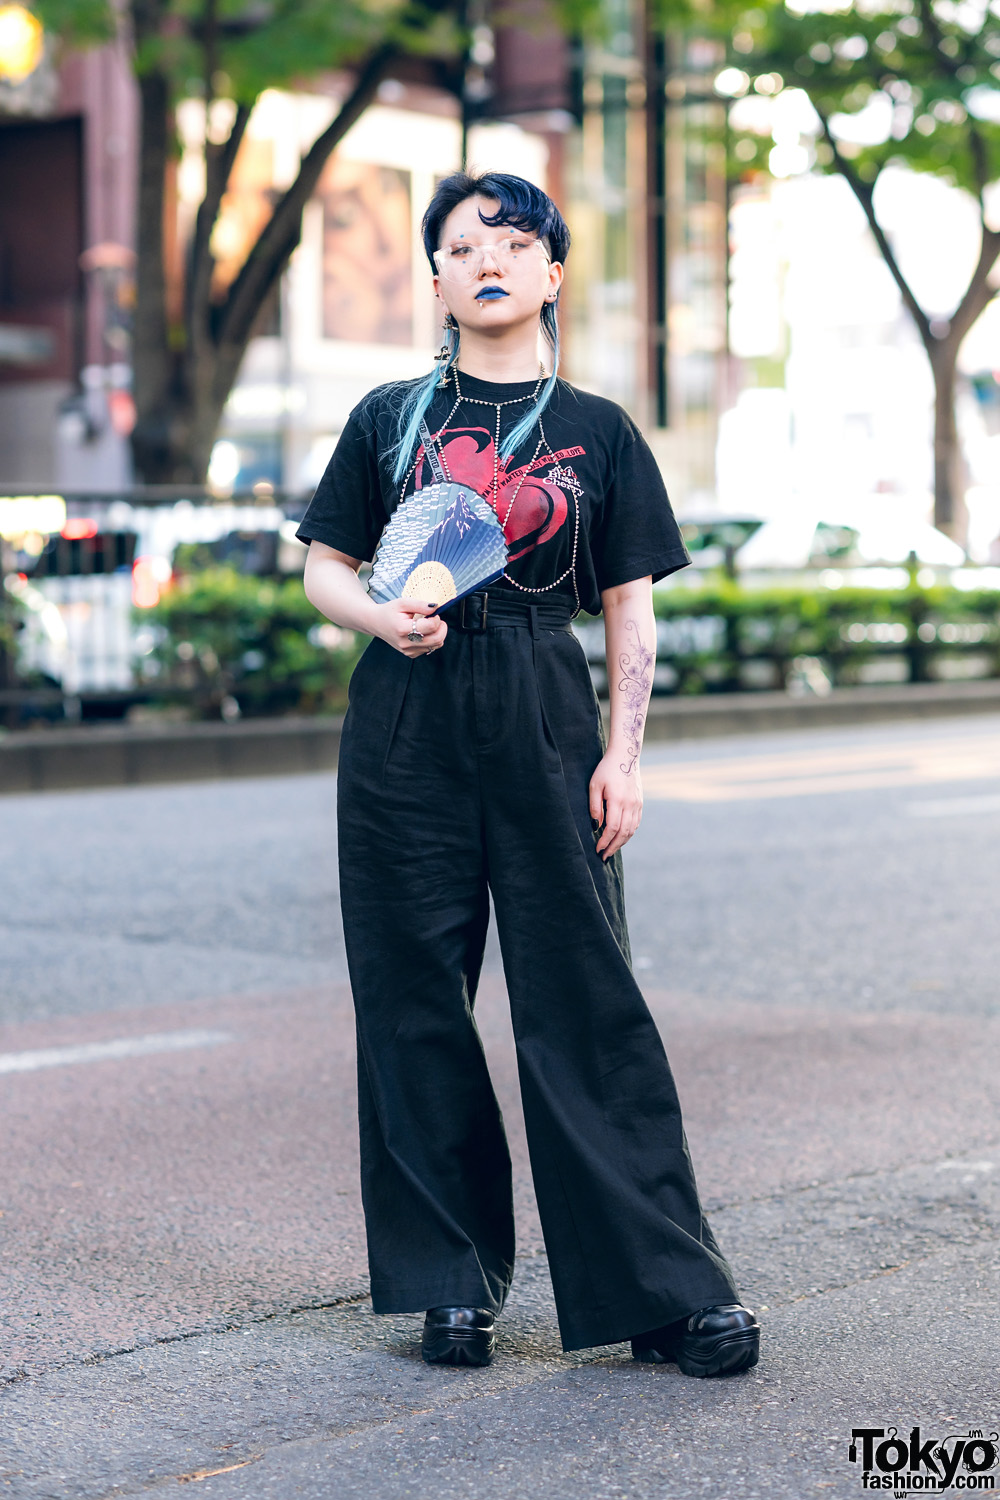 Harajuku Girl in All Black Vintage Street Style w/ Graphic Print Top, Platform Shoes & Tattoos